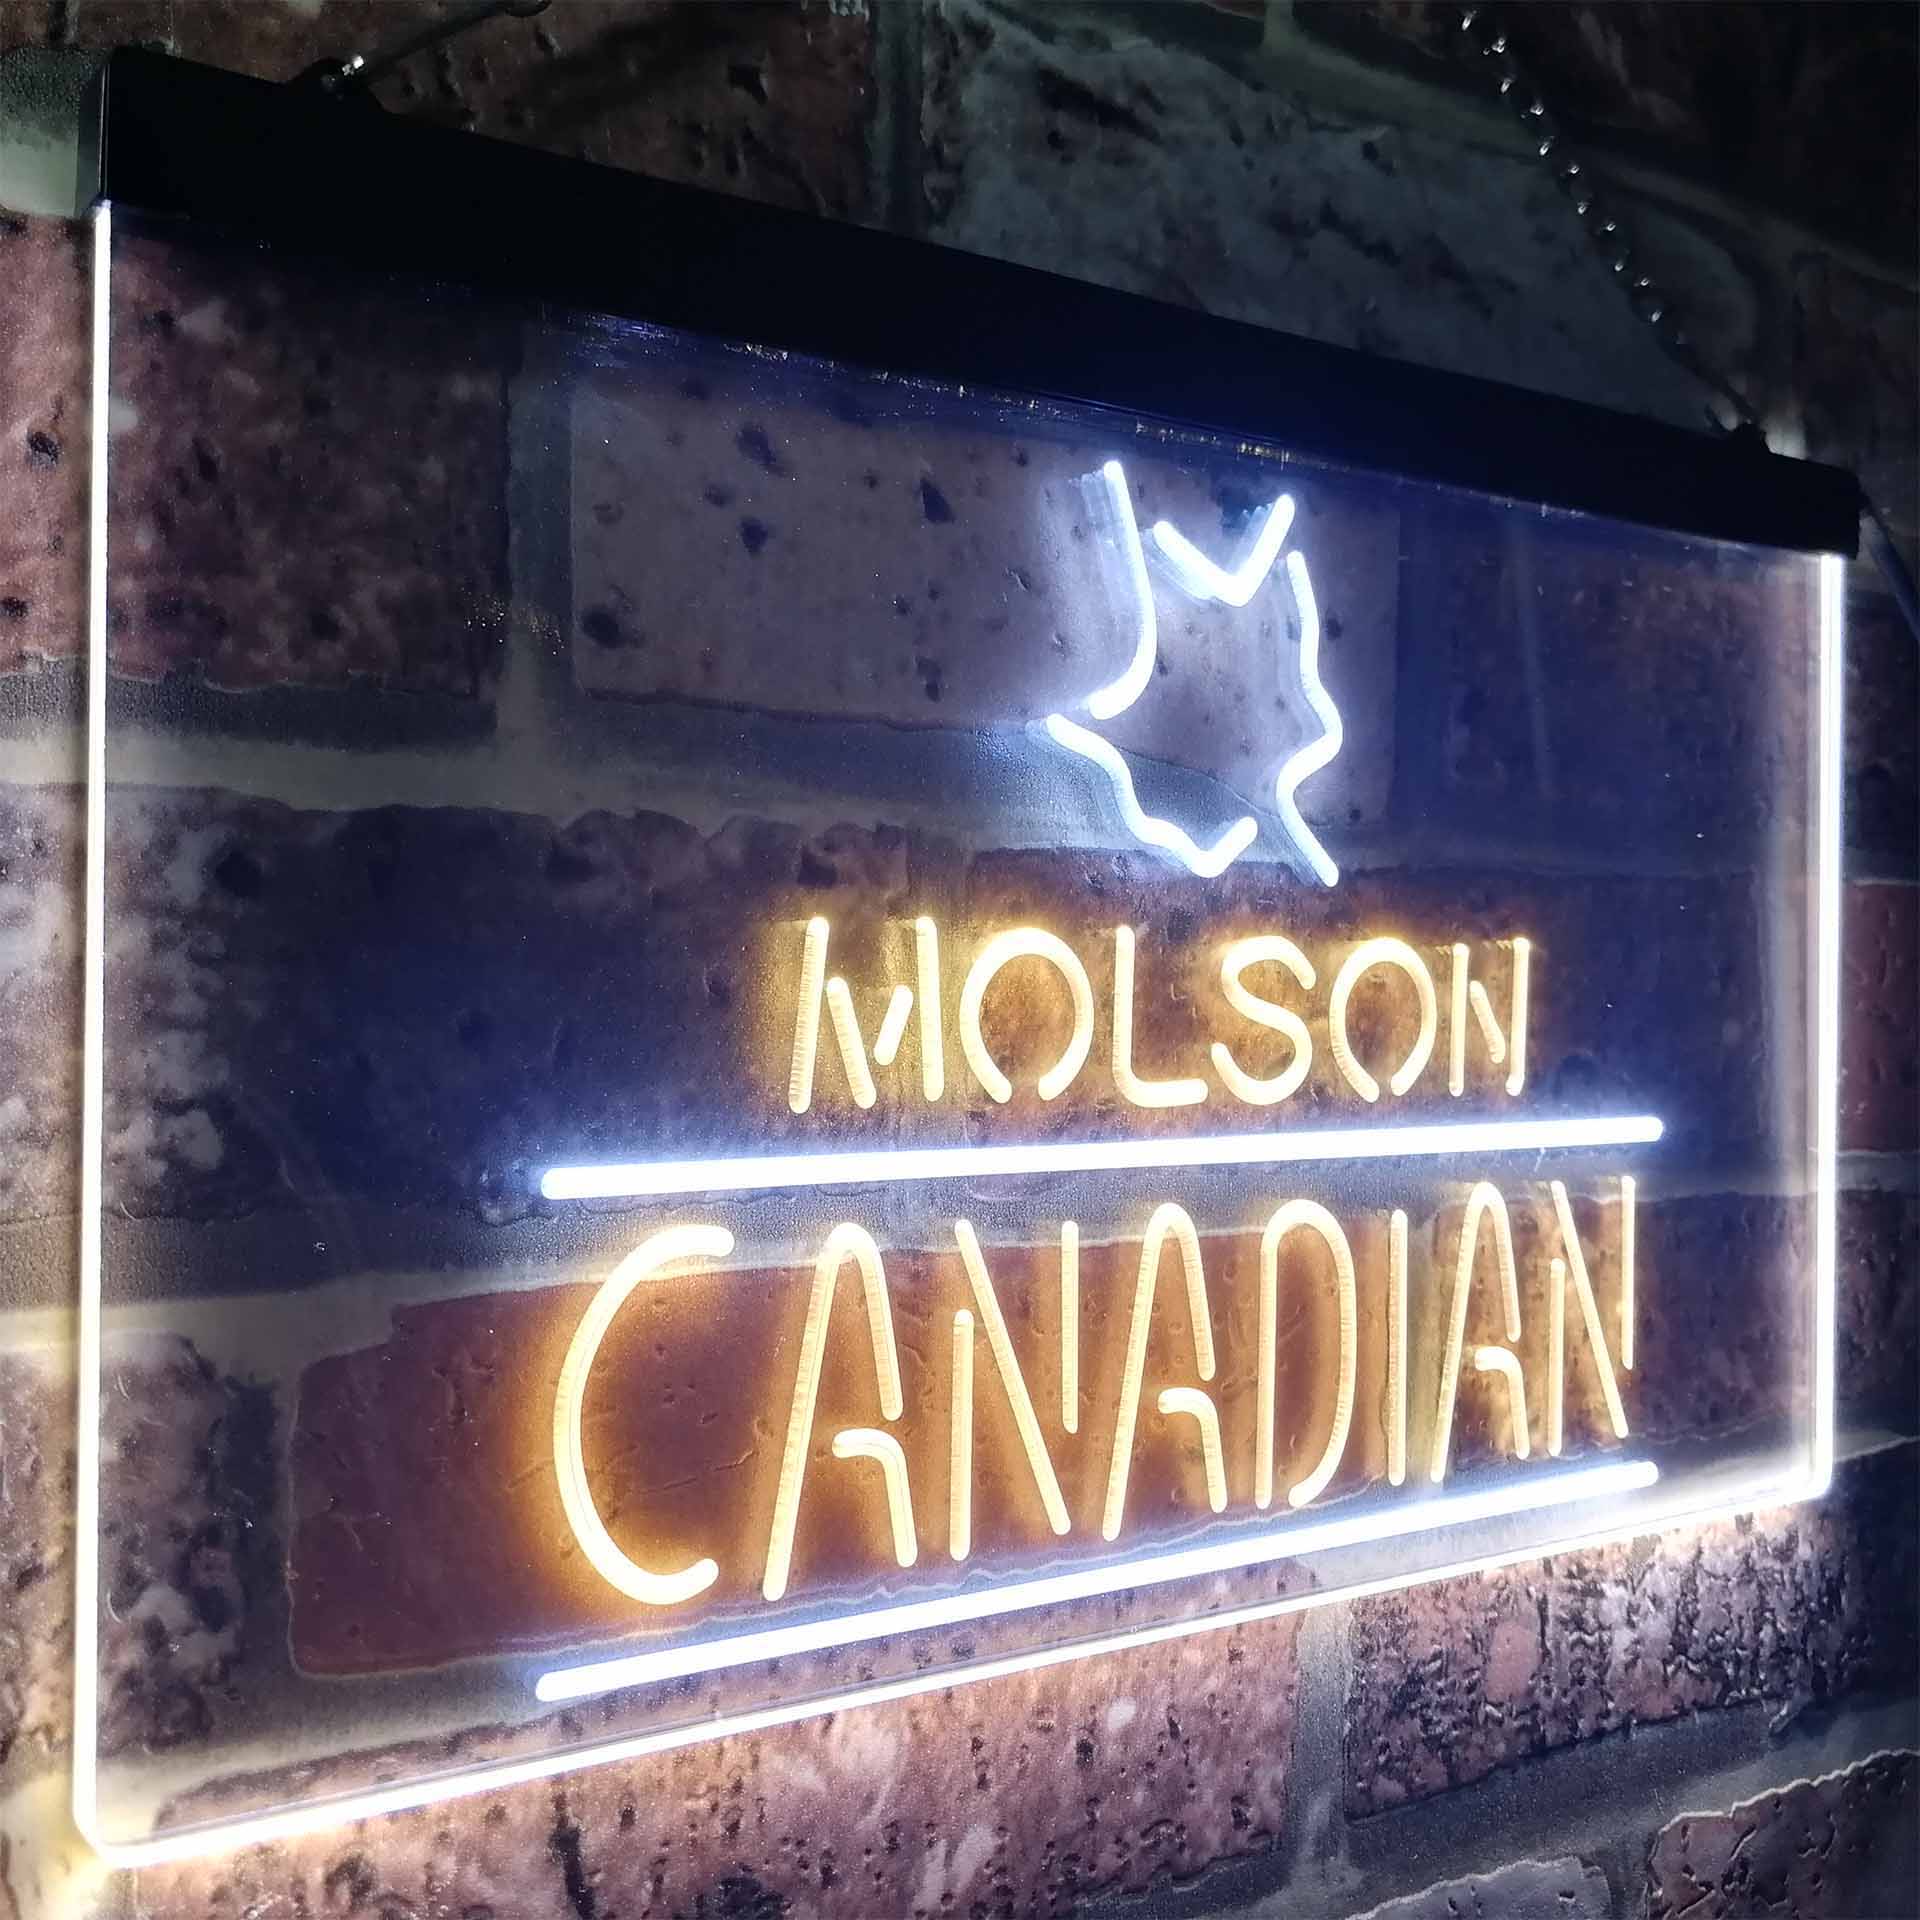 Molson Canadian Beer Neon LED Sign